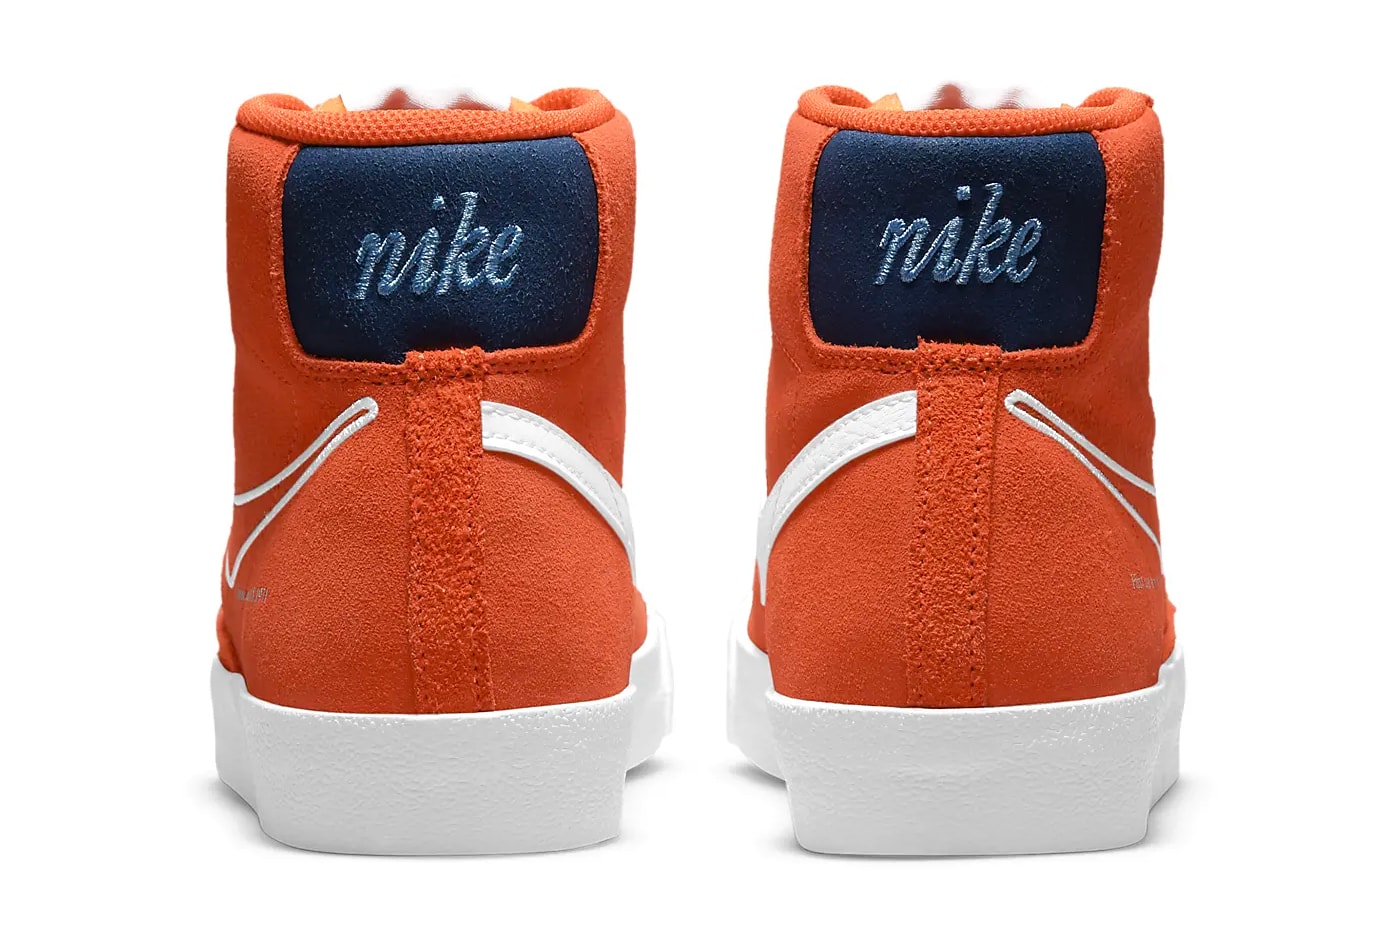 Nike Blazer Mid '77 "Deep Royal Blue" and "Orange" First Pack Swooshes 50th anniversary sneakers footwear orange deep royal orange university gold white